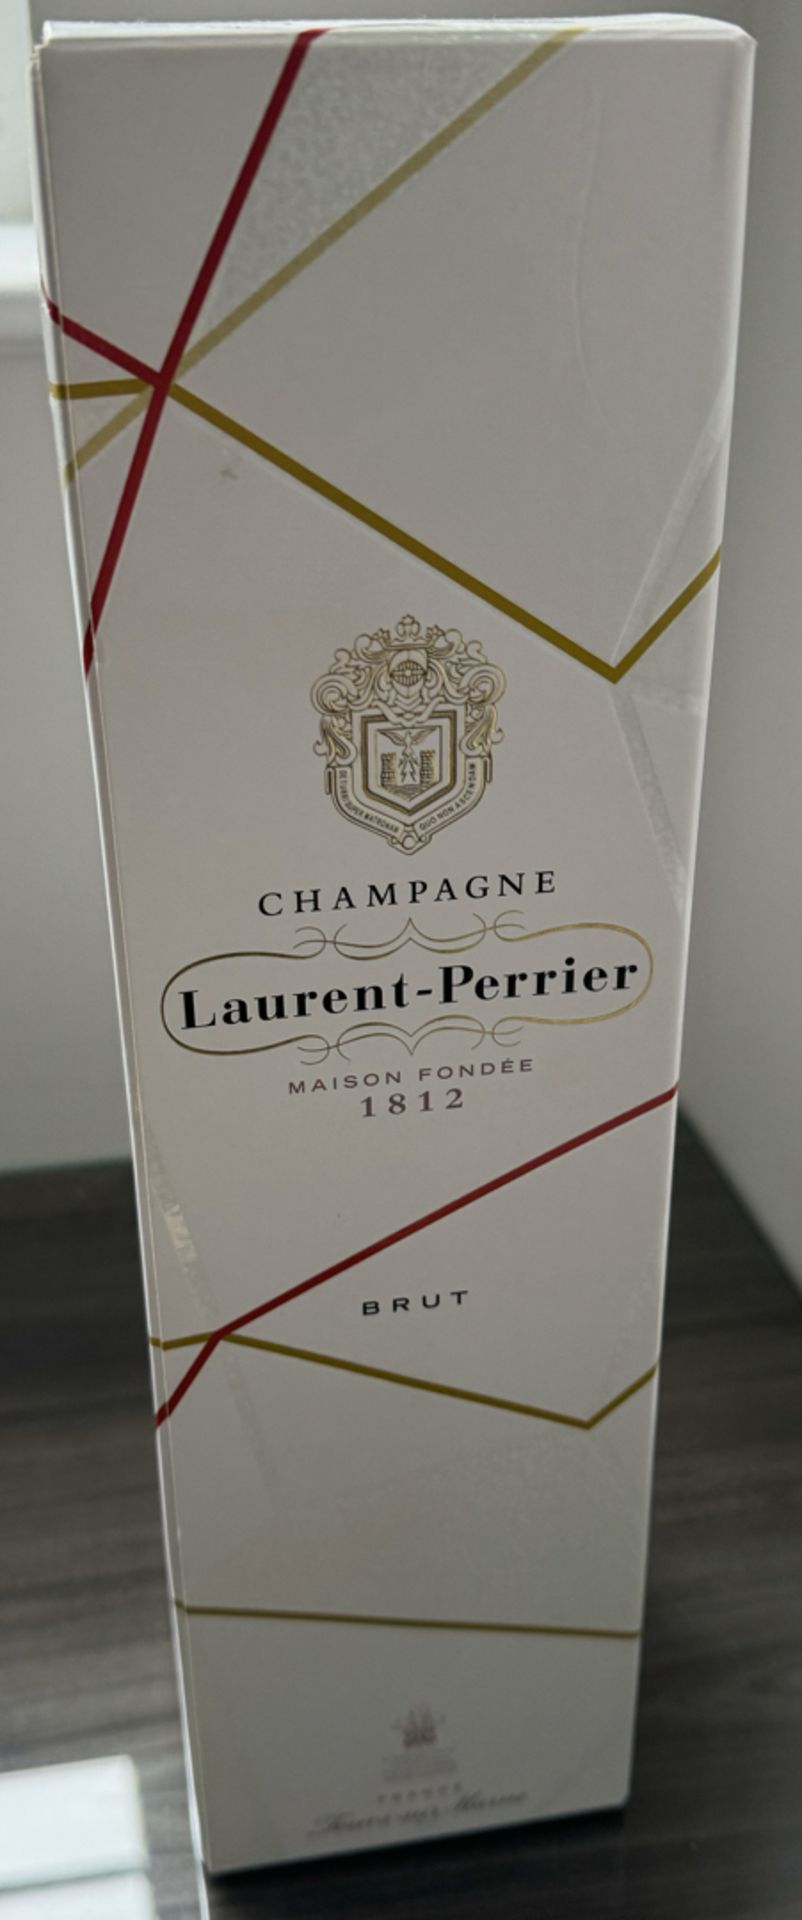 Laurent Perrier 75cl La Cuvee Brut Champagne - New in Box - Image 2 of 3